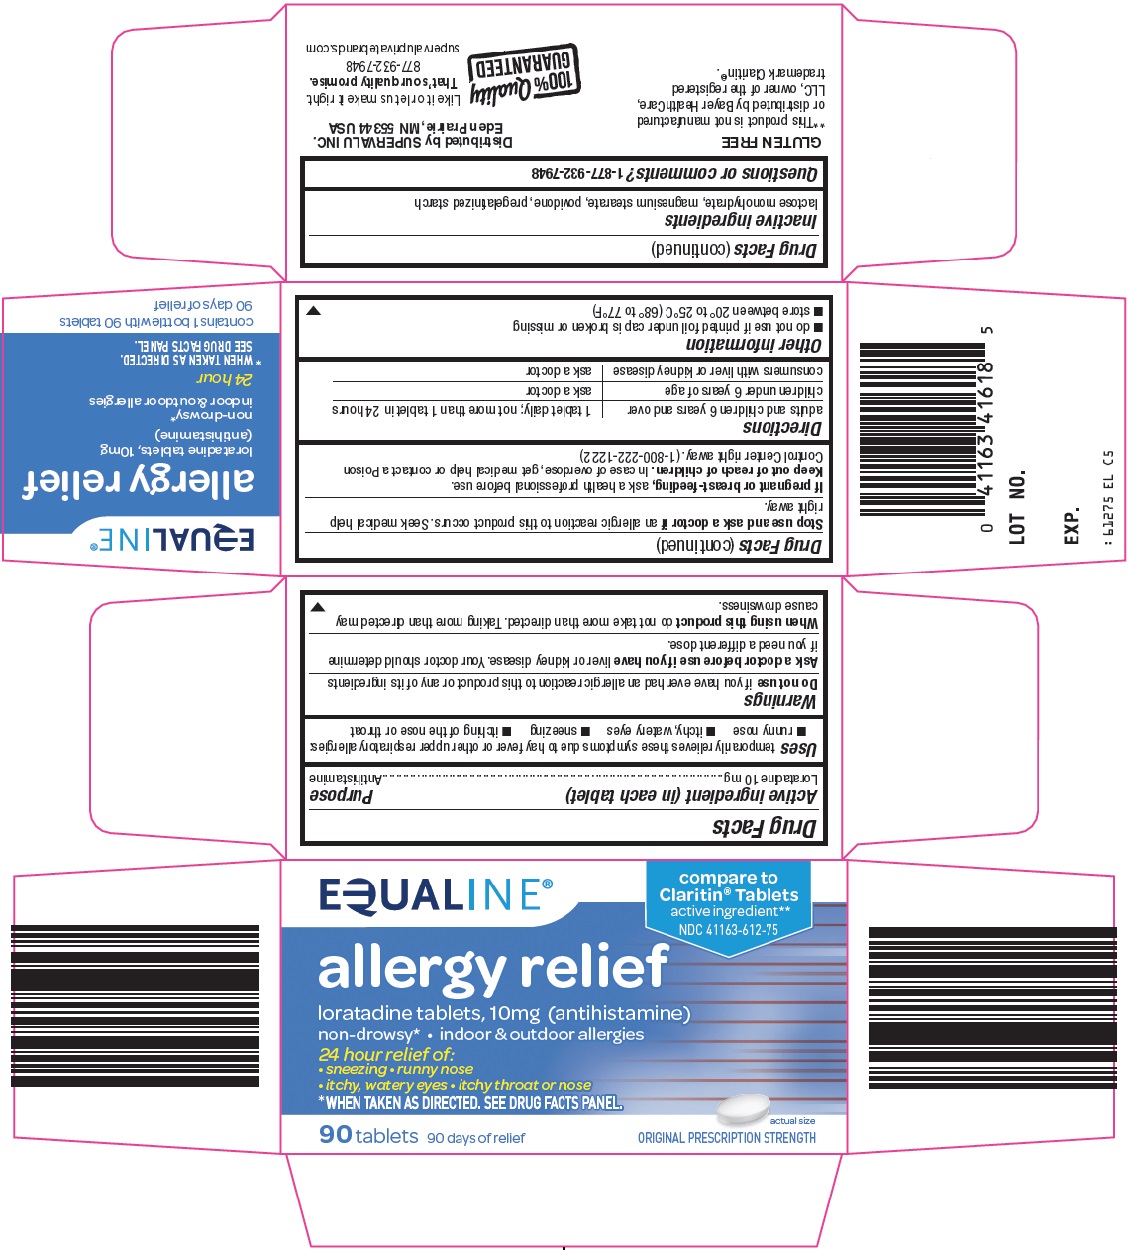 Equaline Allergy Relief